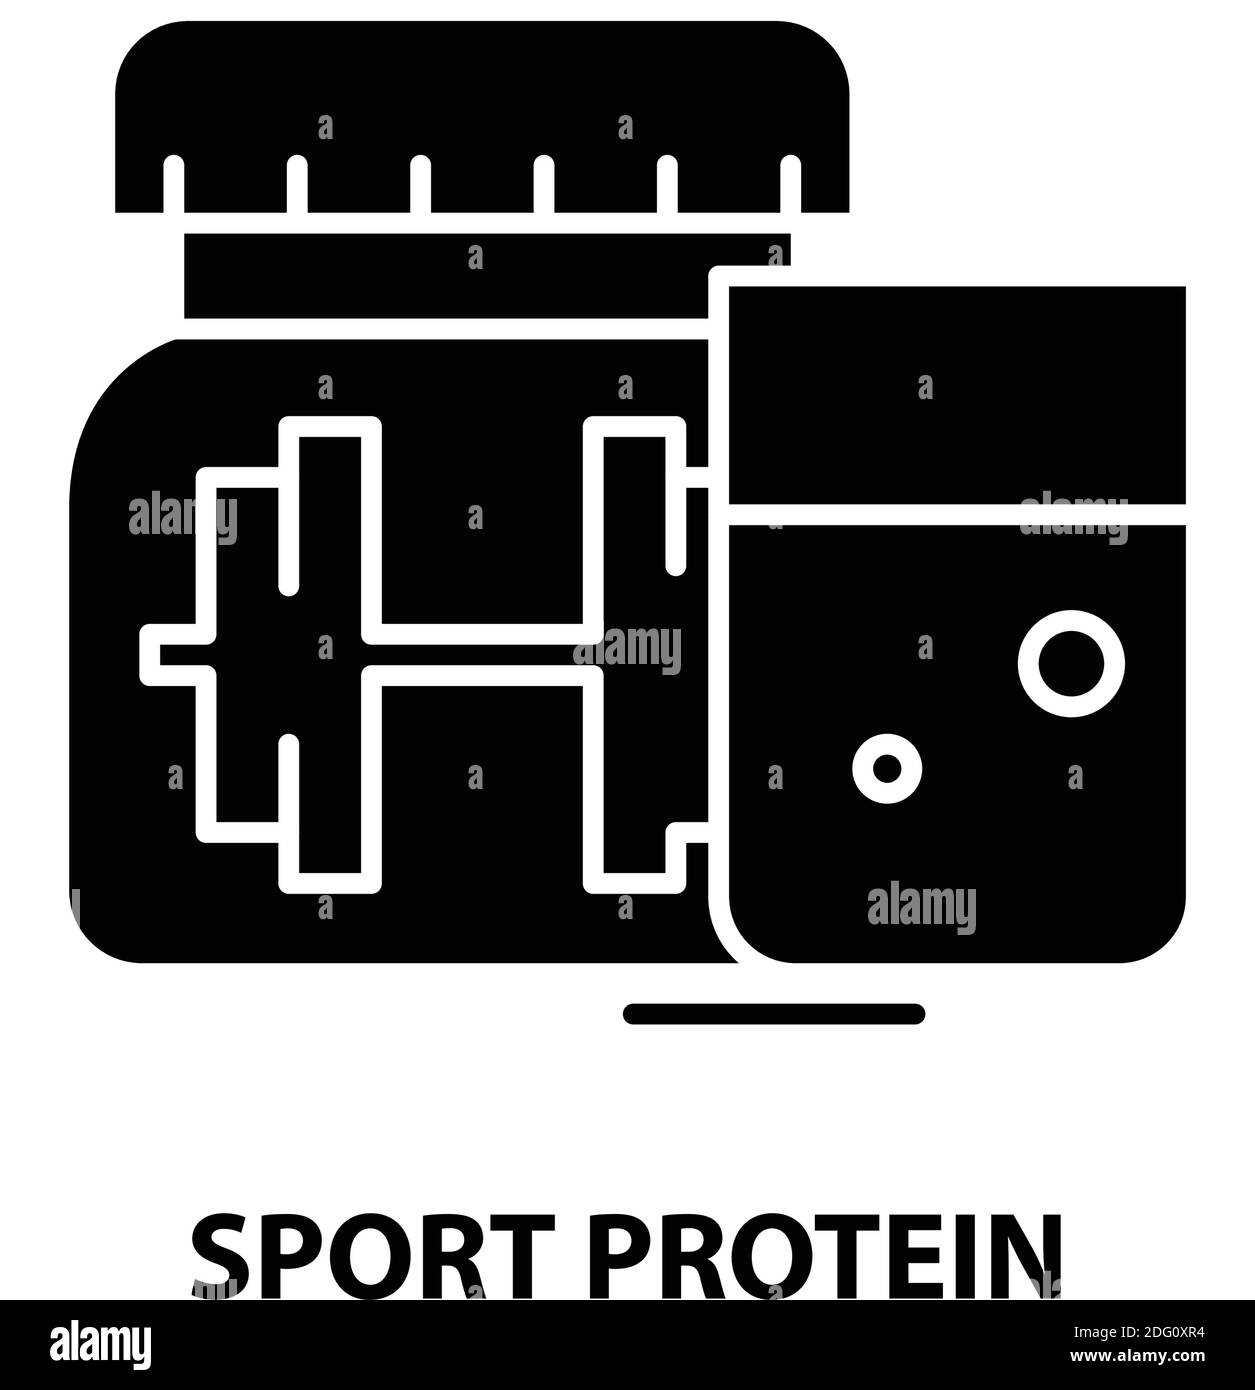 sport protein icon, black vector sign with editable strokes, concept illustration Stock Vector